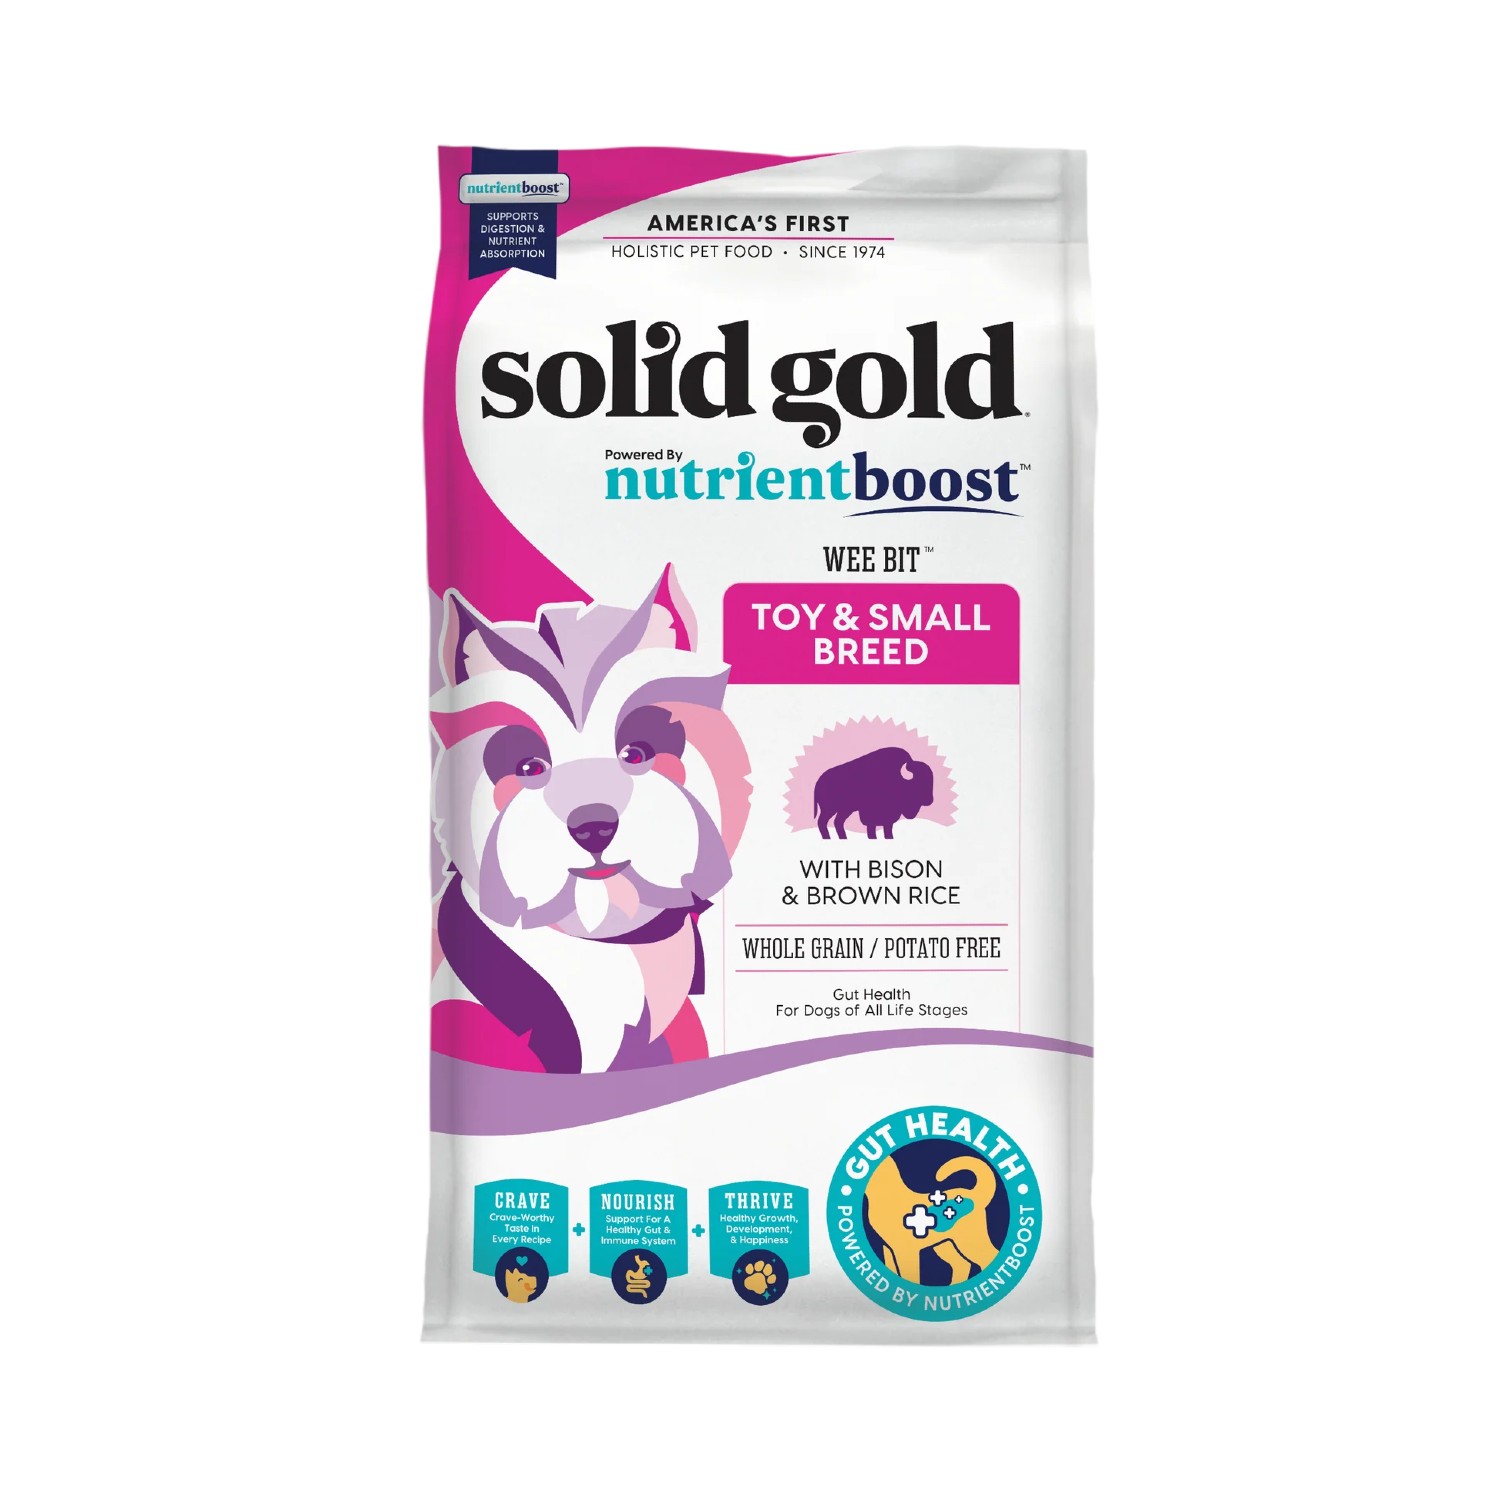 https://images.baxterboo.com/global/images/products/large/solid-gold-nutrientboost-wee-bit-toy-small-breed-dry-dog-food-bison-brown-rice-pearled-barley-recipe-5875.jpg